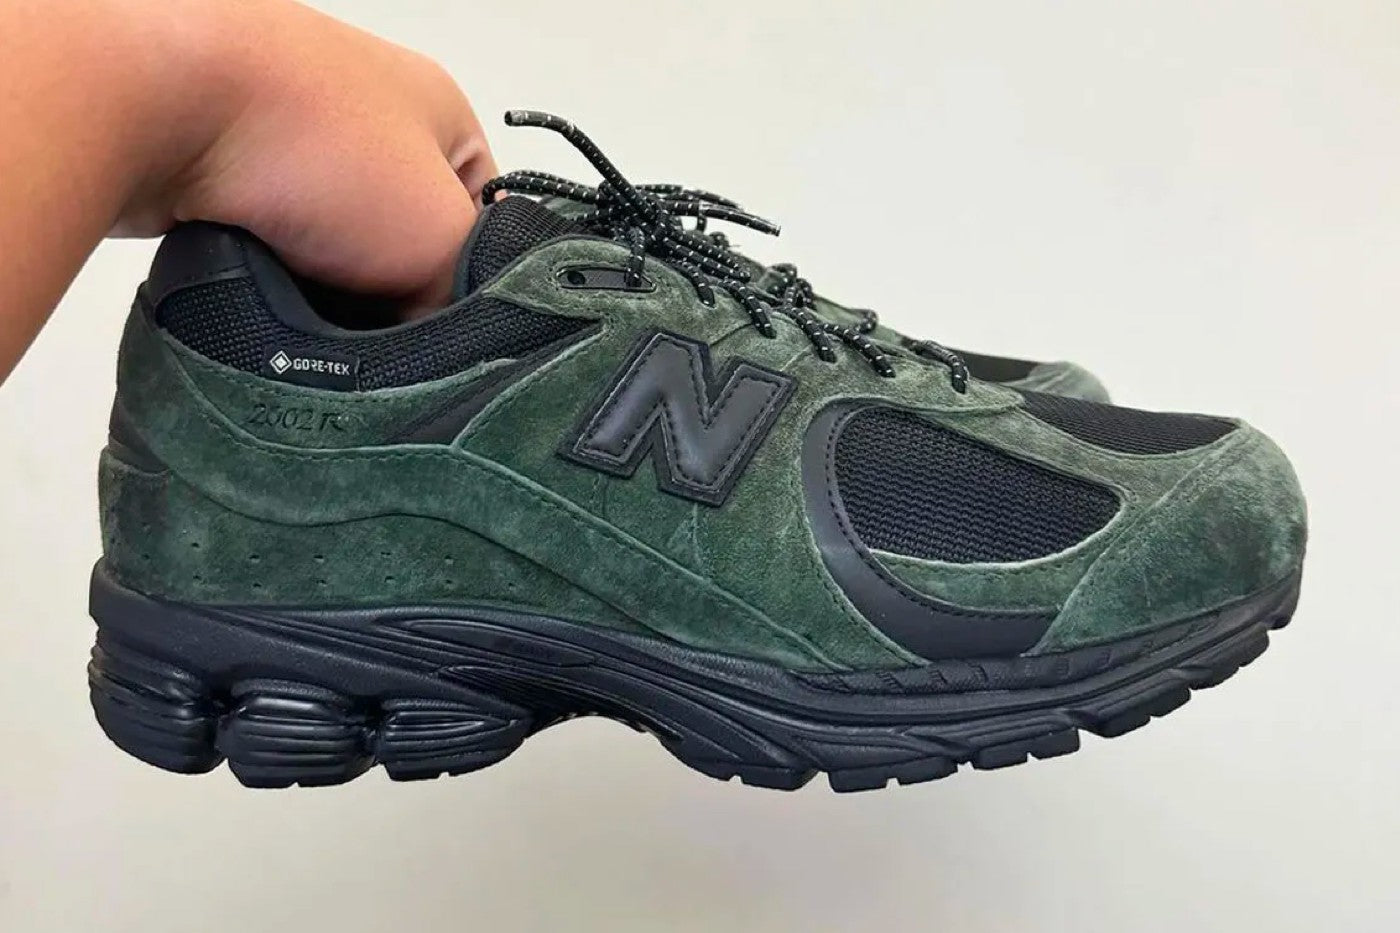 The JJJJound x New Balance 2002R “Green” Gets Covered in Gore-Tex